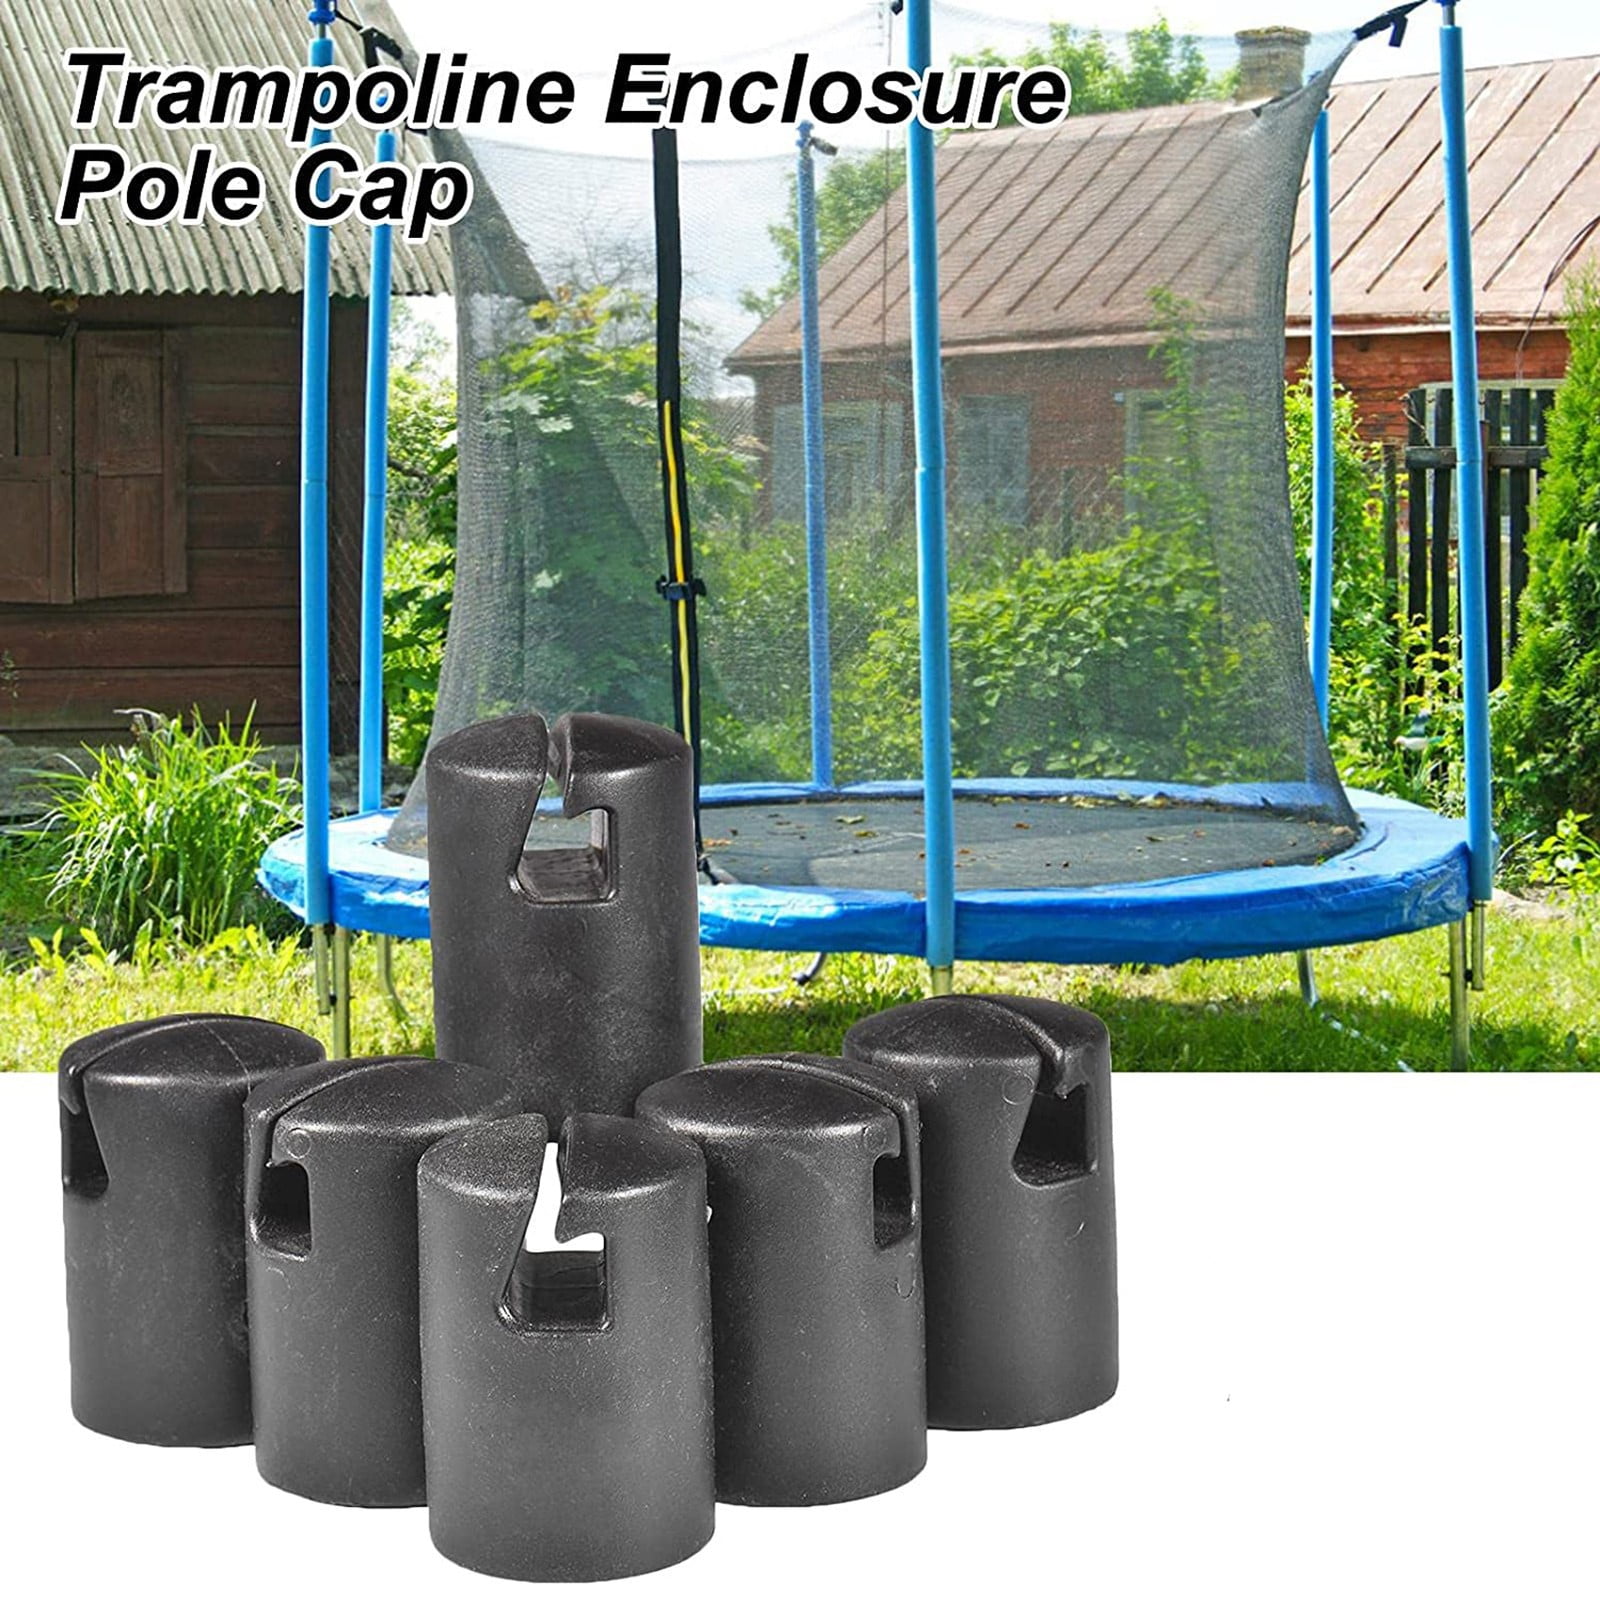 Bzoosio 6pcs Trampoline Enclosure Pole Cap For Flat Steel Sheet Top Ring System